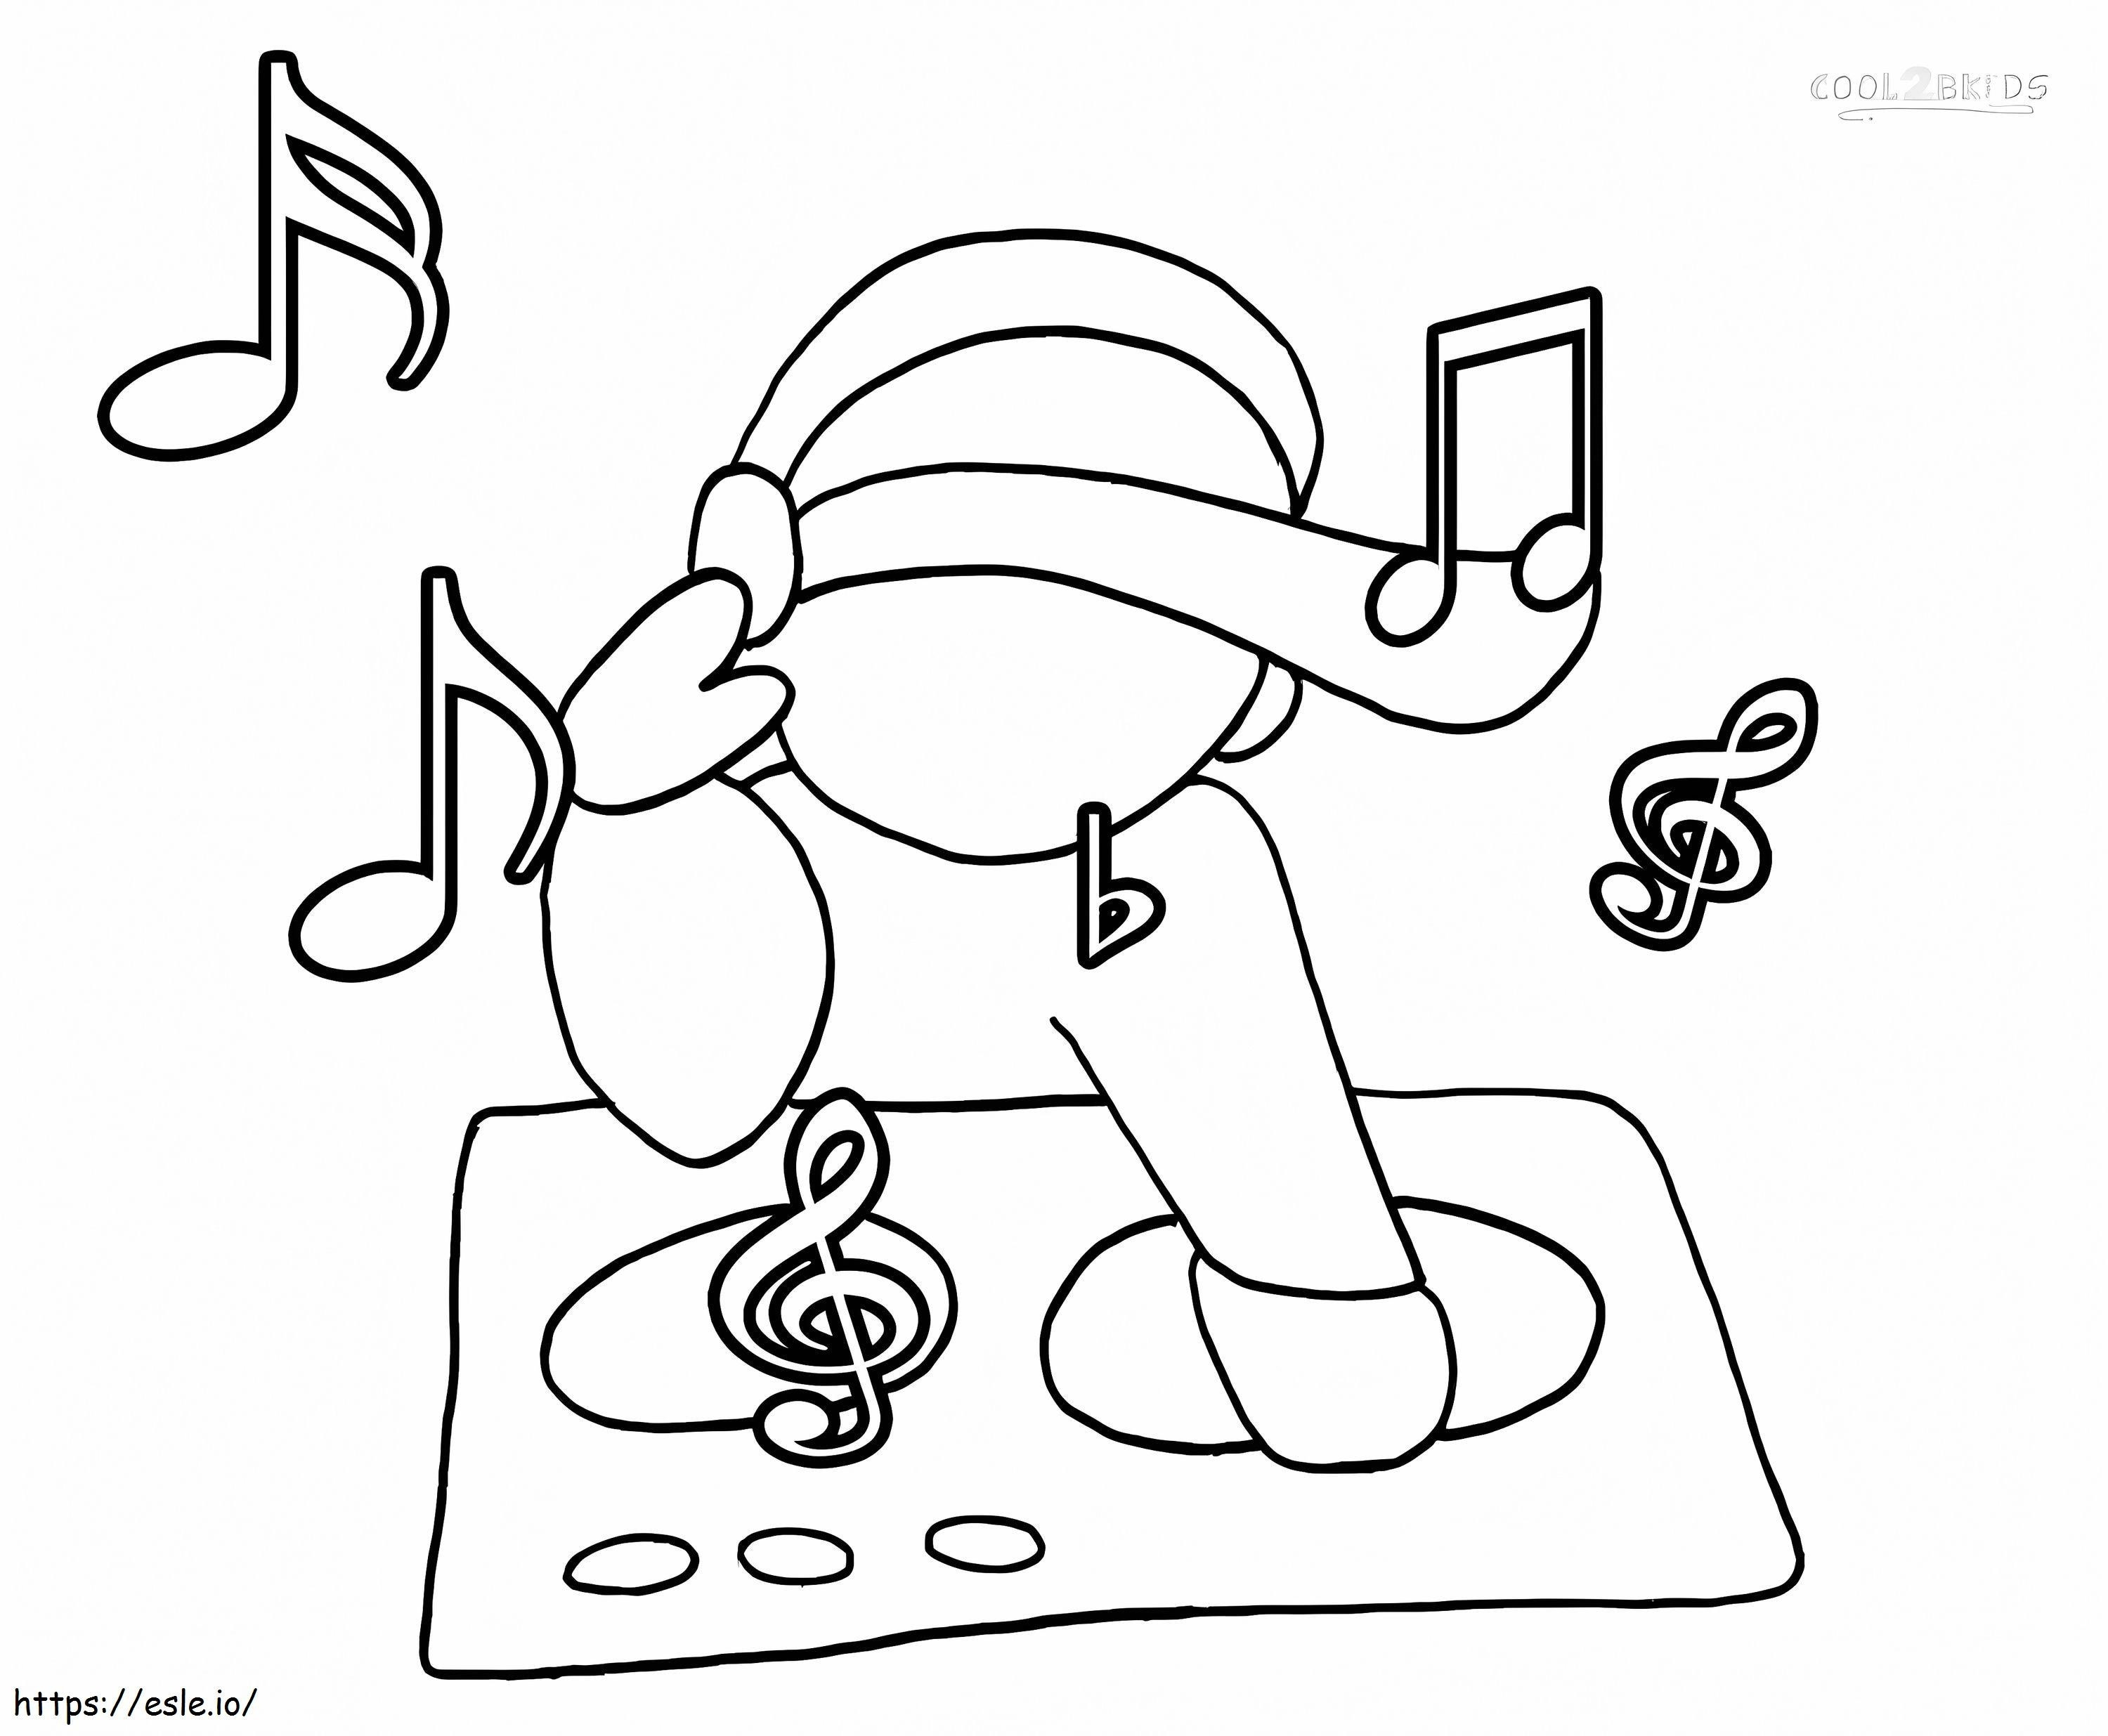 Dj Music Notes coloring page